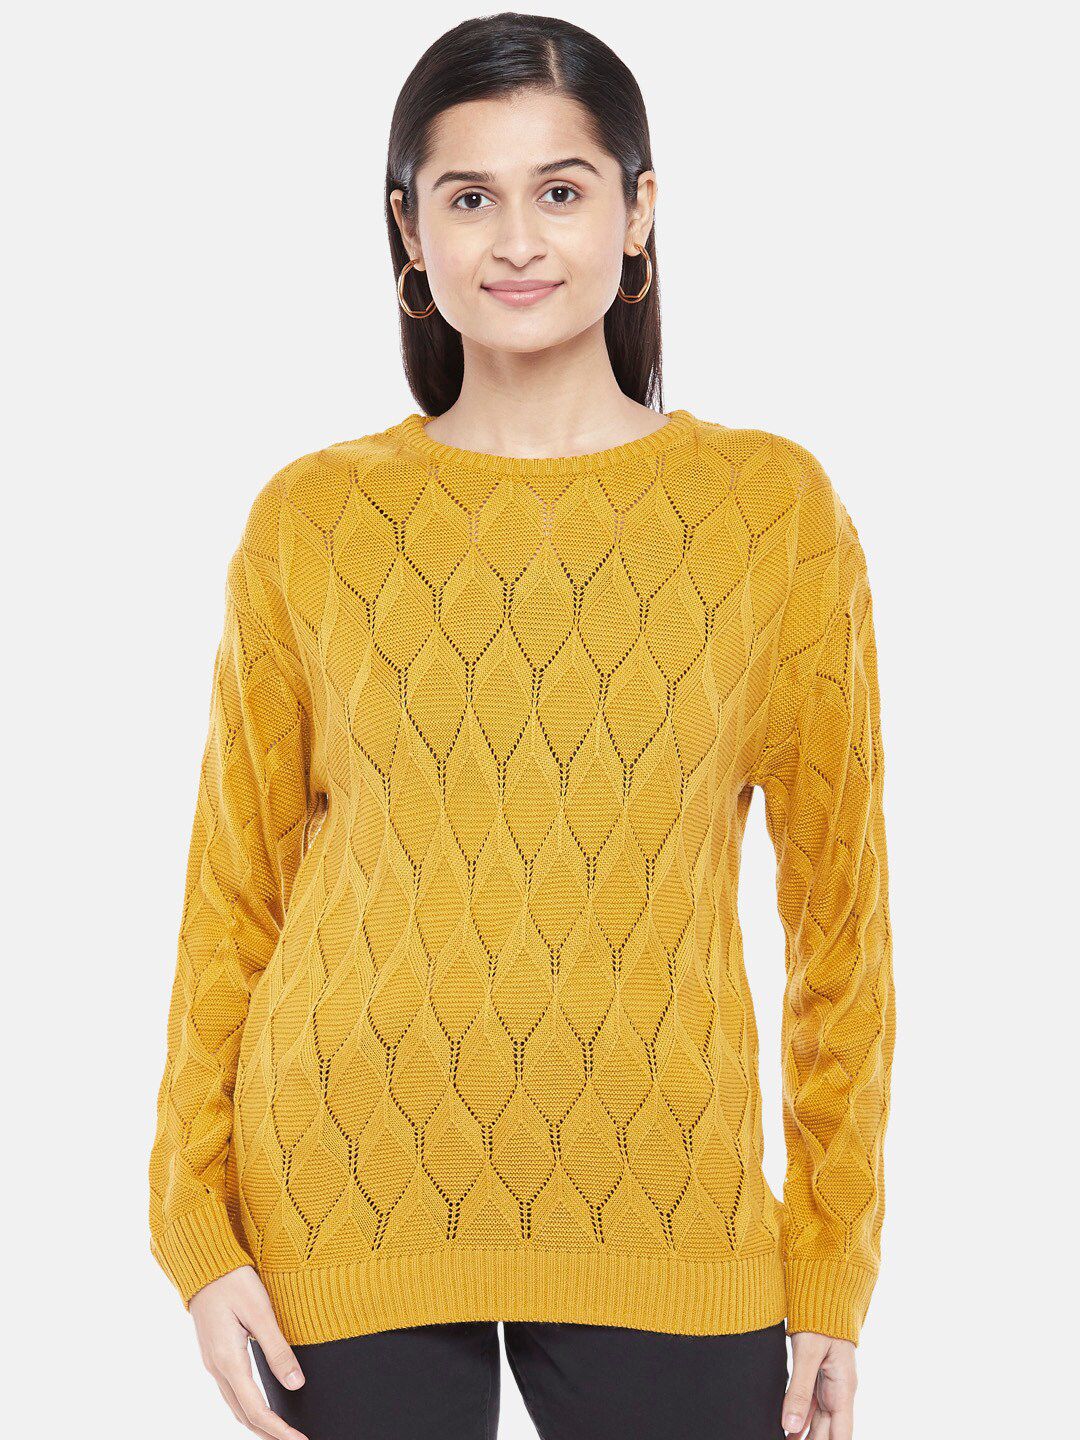 Honey by Pantaloons Women Mustard Yellow Pure Acrylic Pullover Sweater Price in India